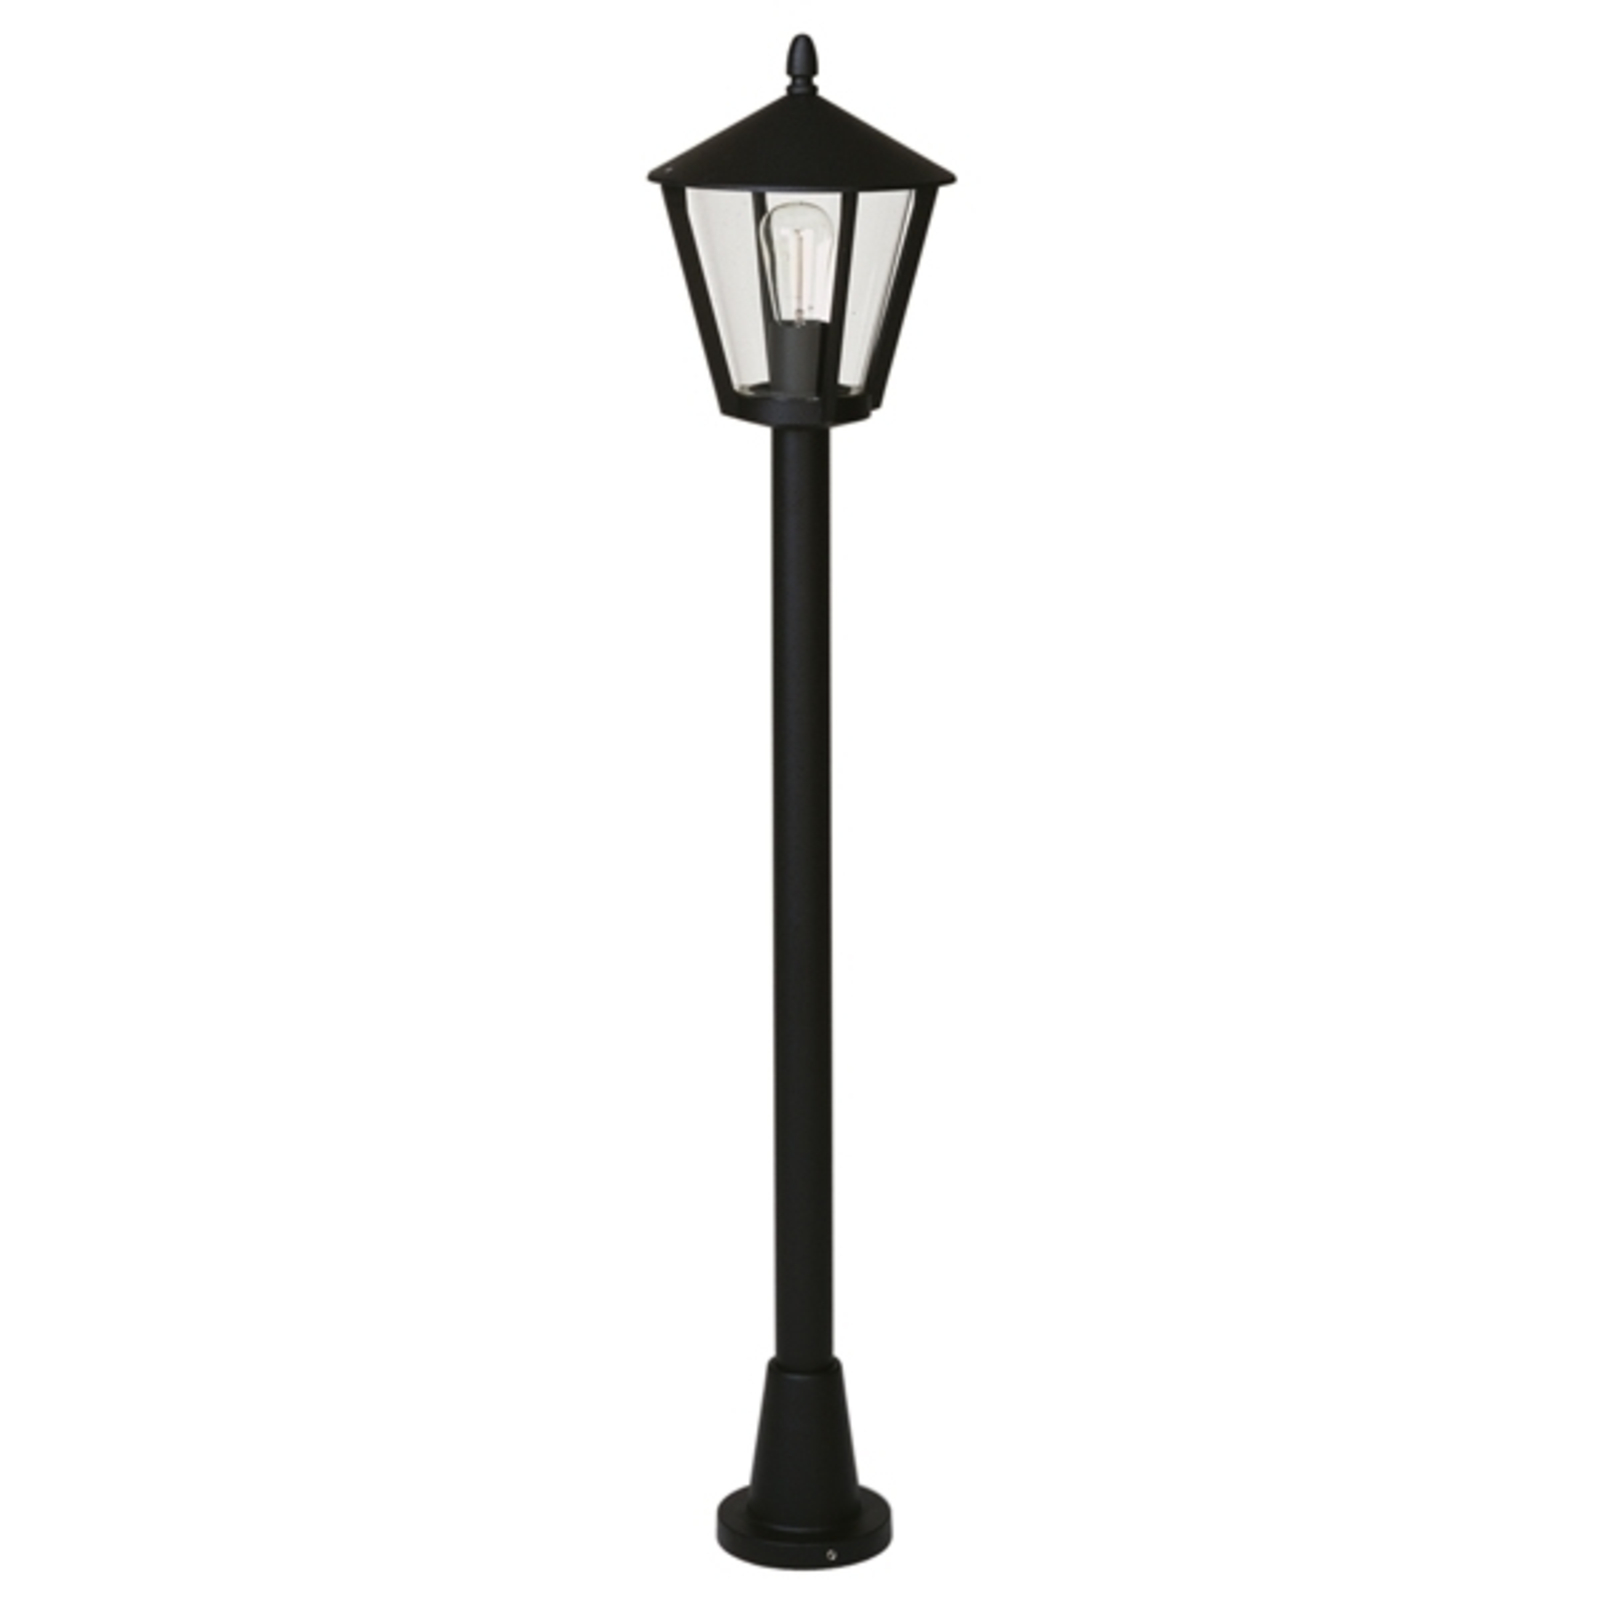 Country house post light 677, black